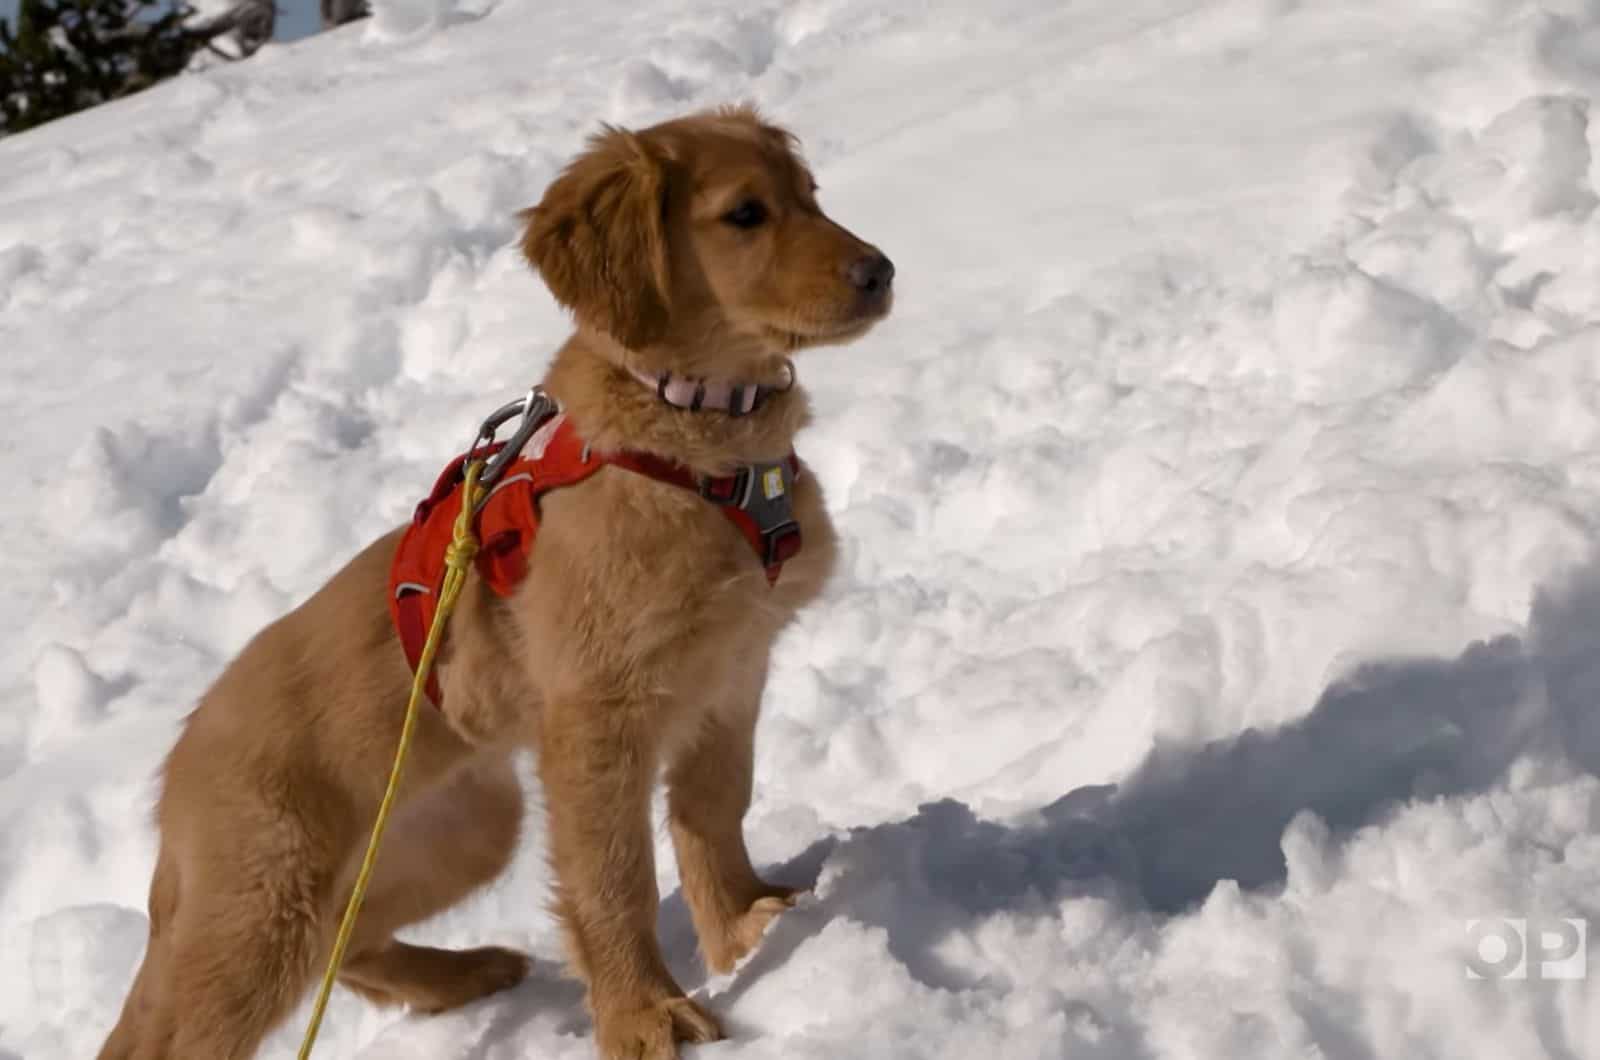 Paw Patrol: The Mount Bachelor Avalanche Dogs